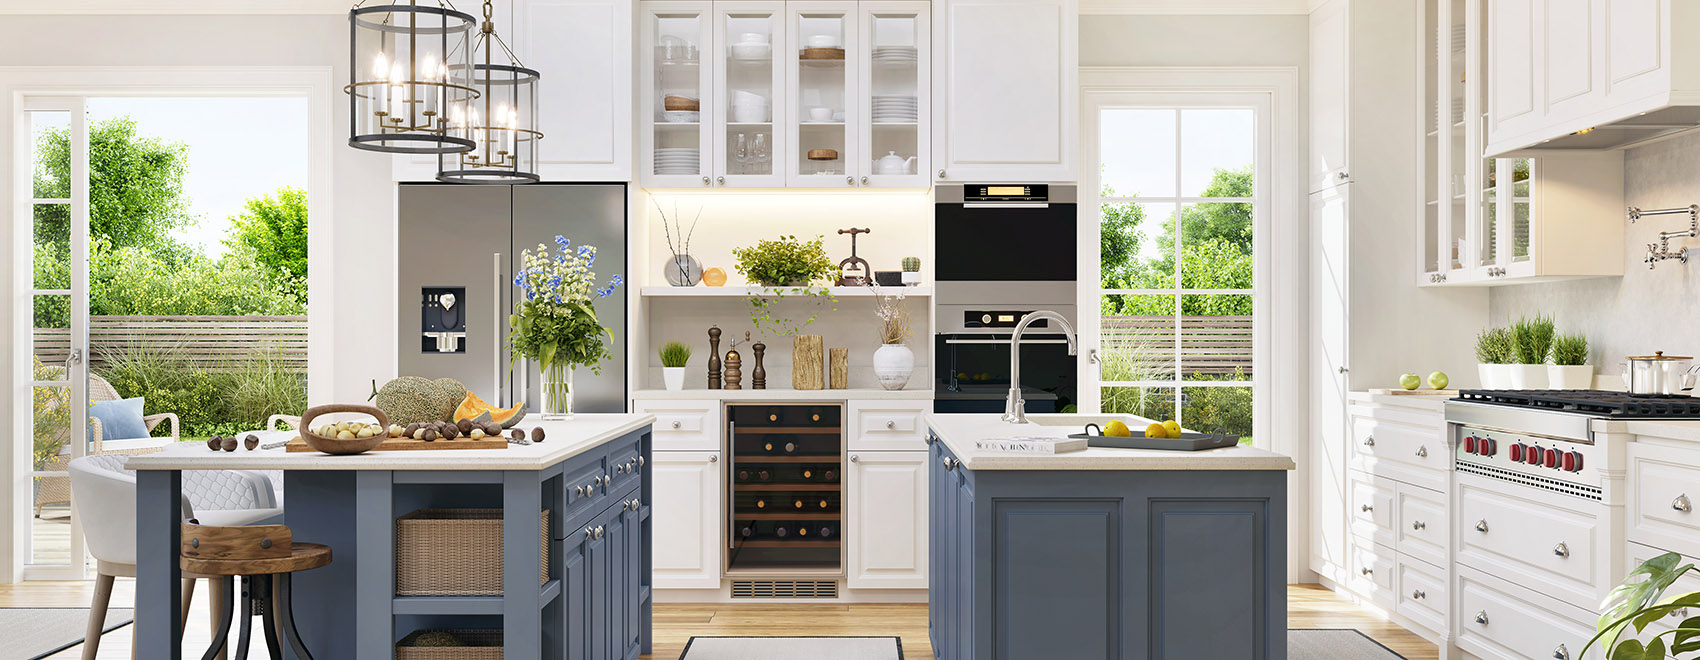 Modern kitchen with white counters and upper cabinets, gray lower cabinets, and spring green accents